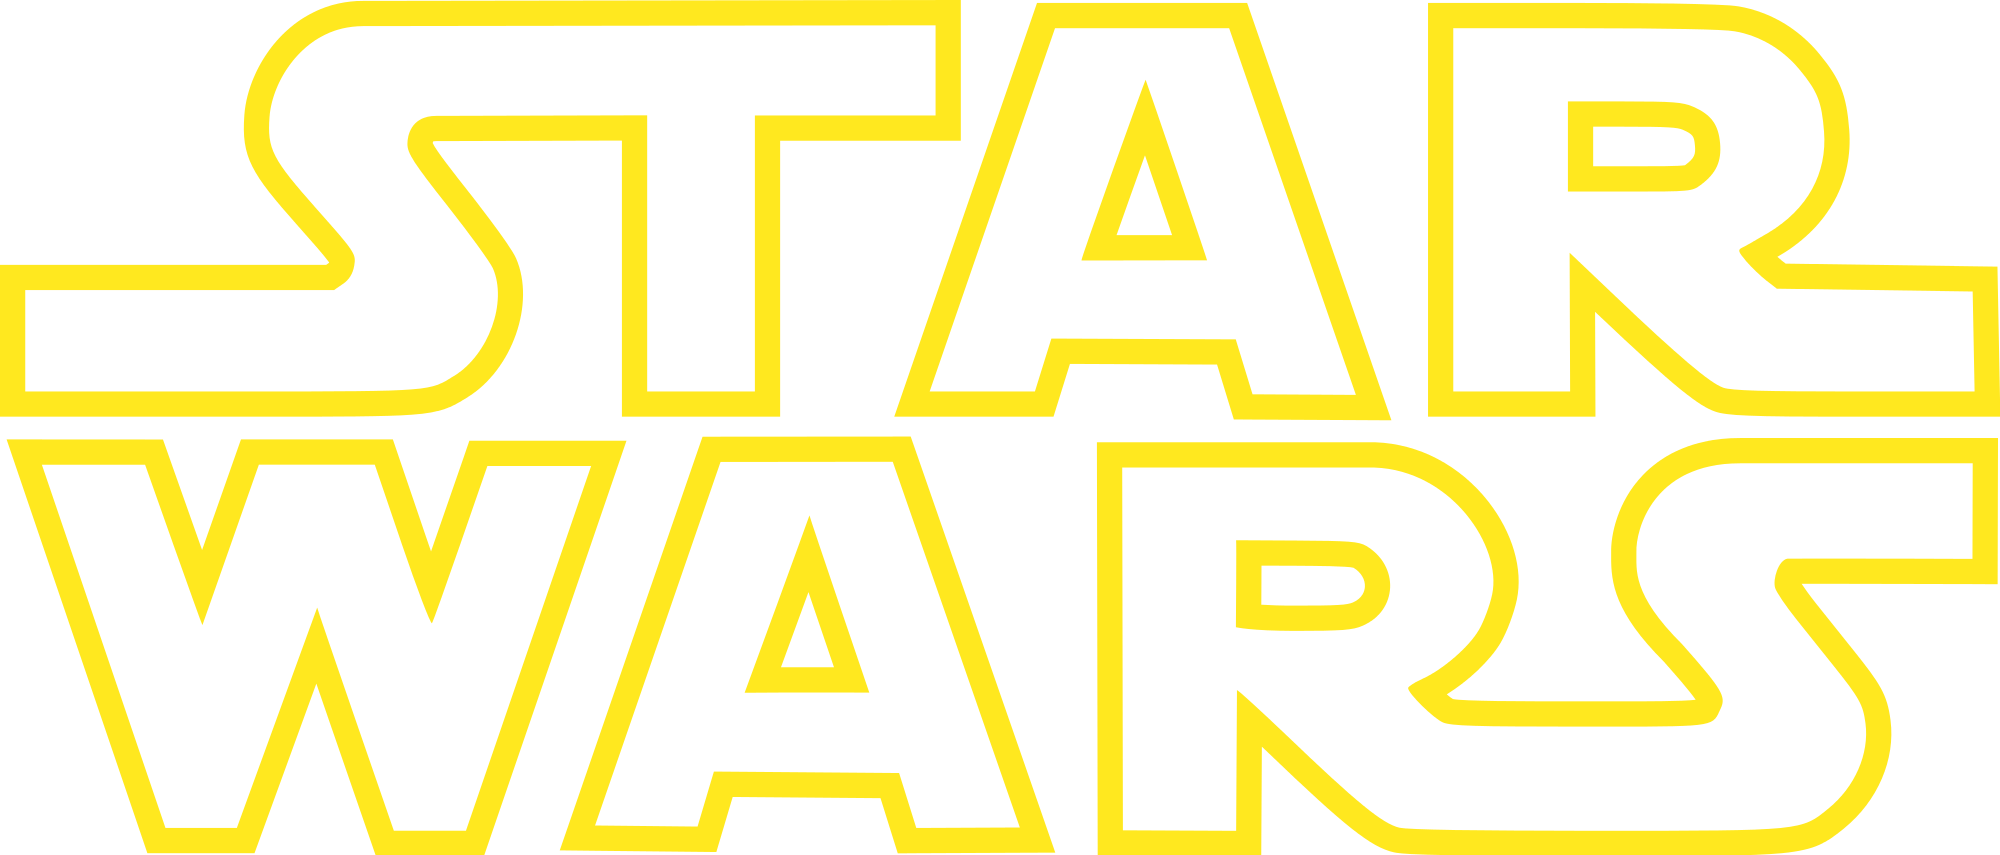 Star Wars Logo Transparent Background Image In Collection